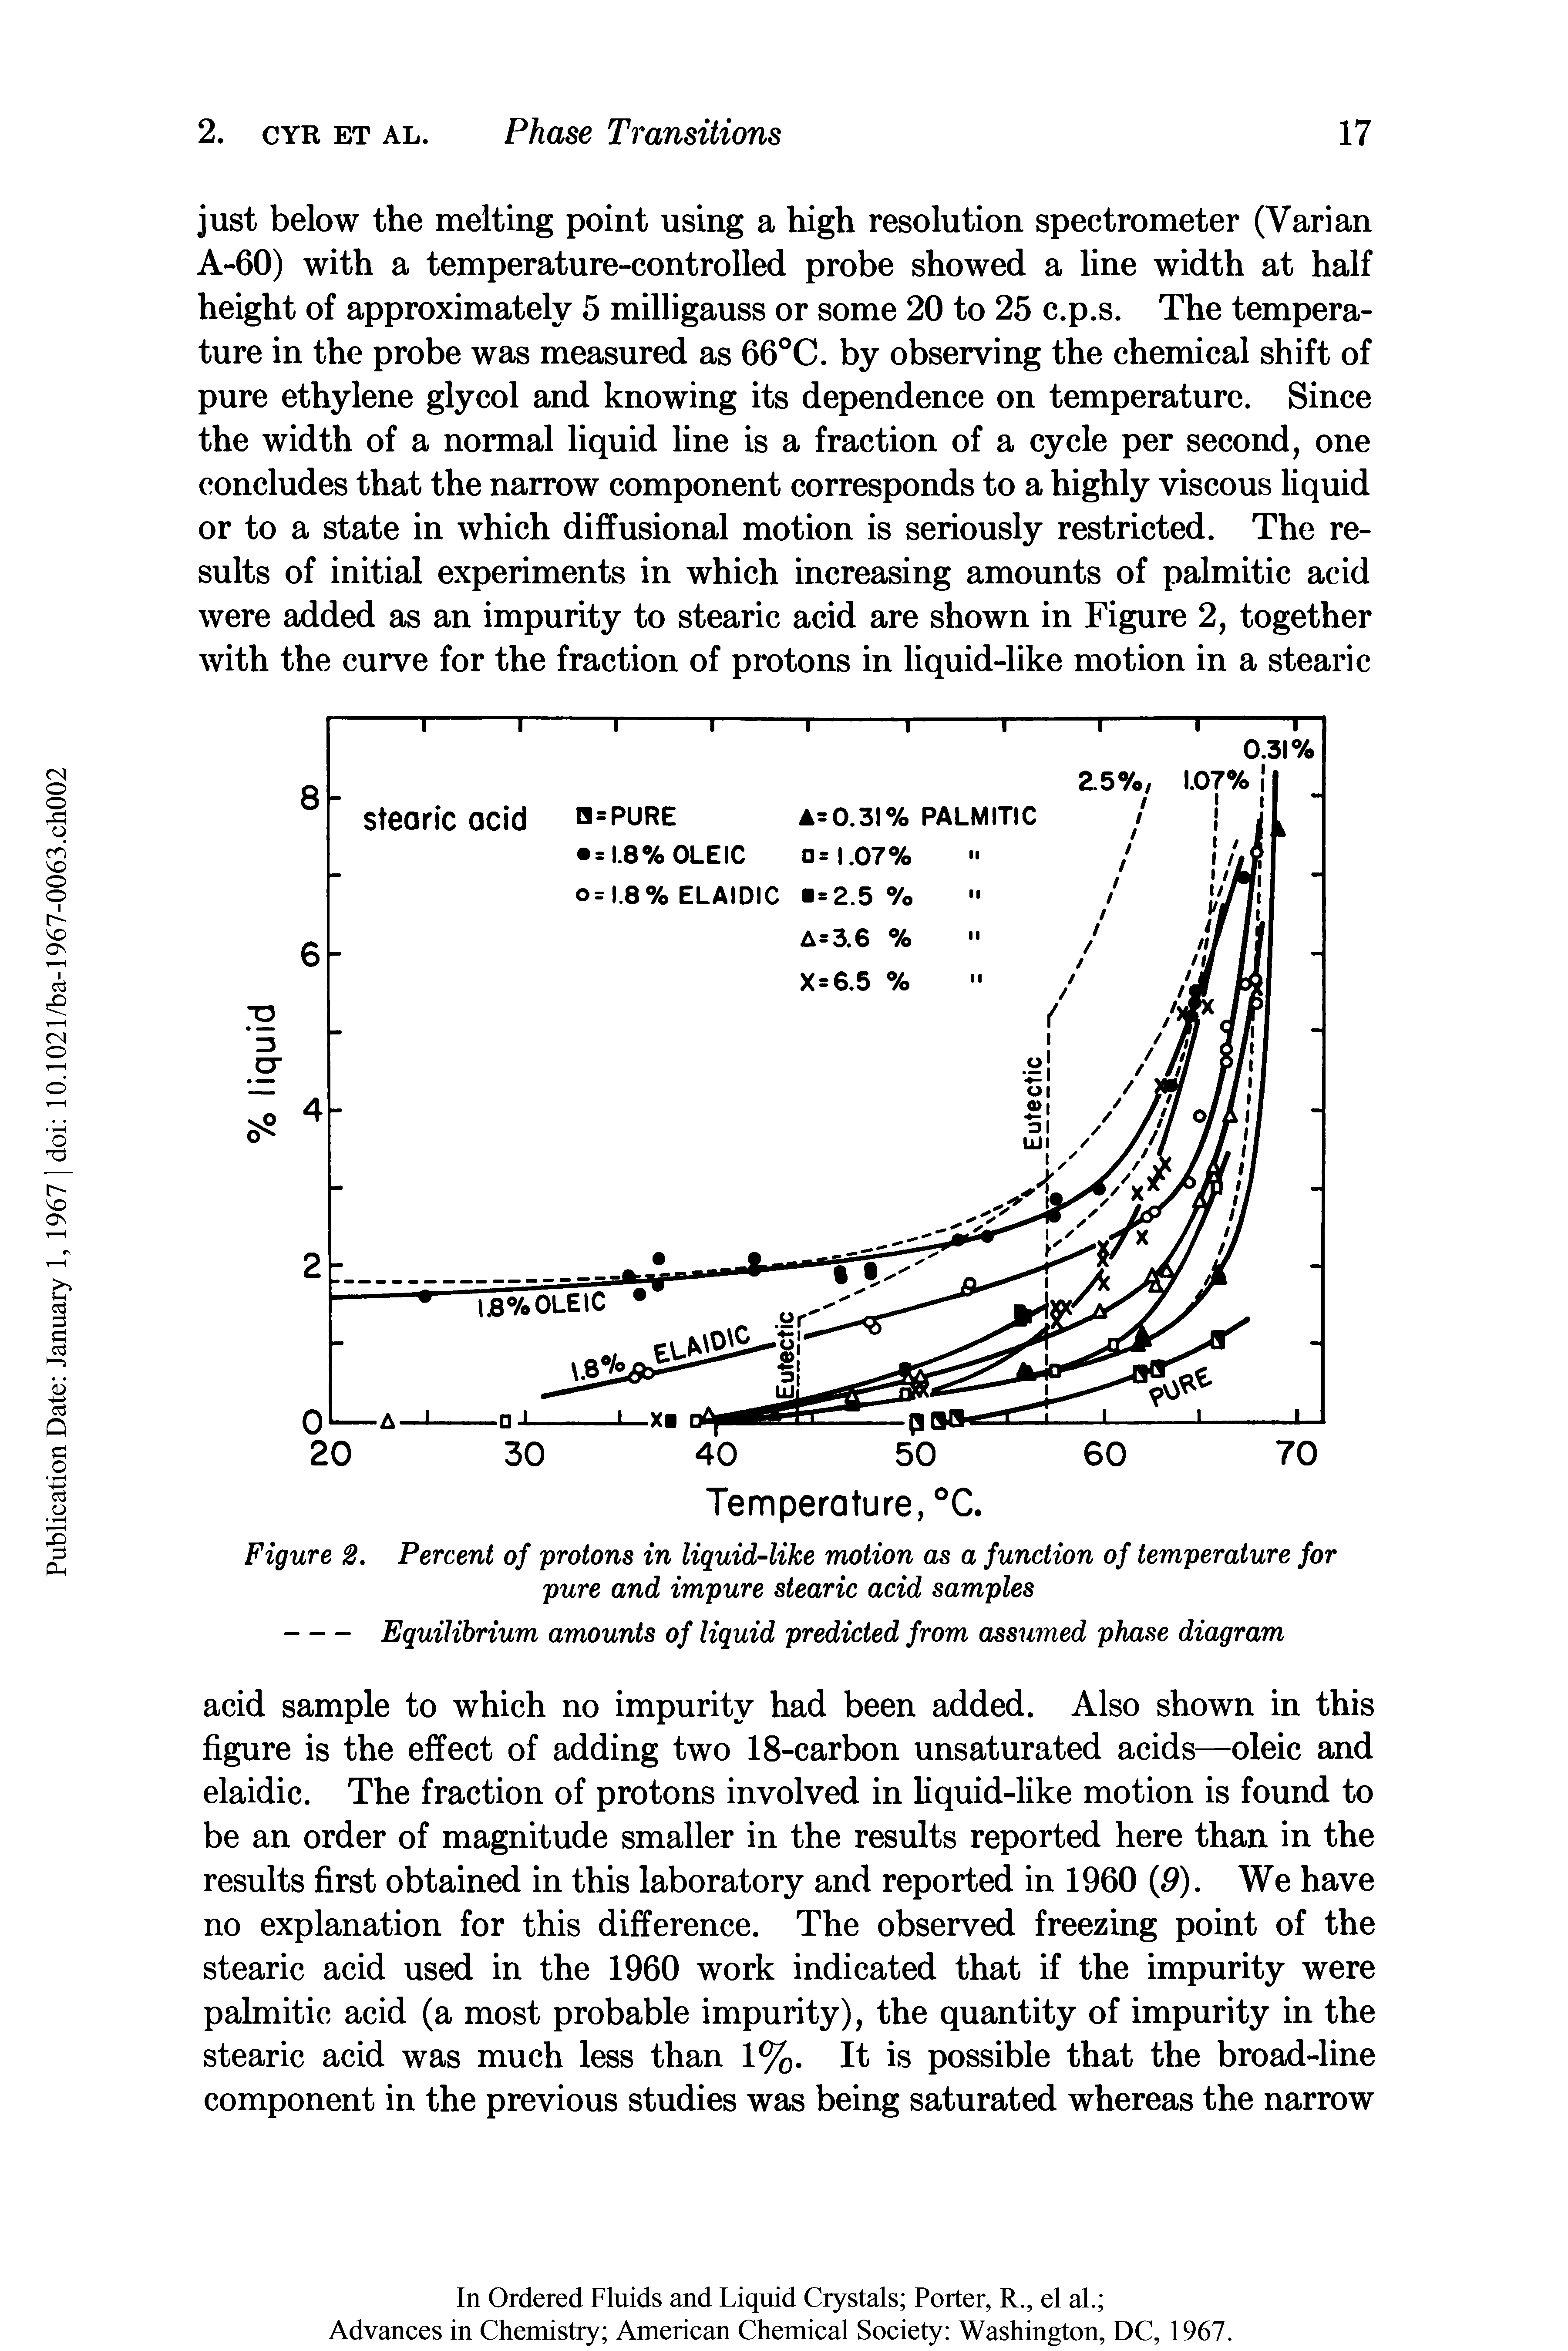 Figure 2. Percent of protons in liquid-like motion as a function of temperature for pure and impure stearic acid samples...